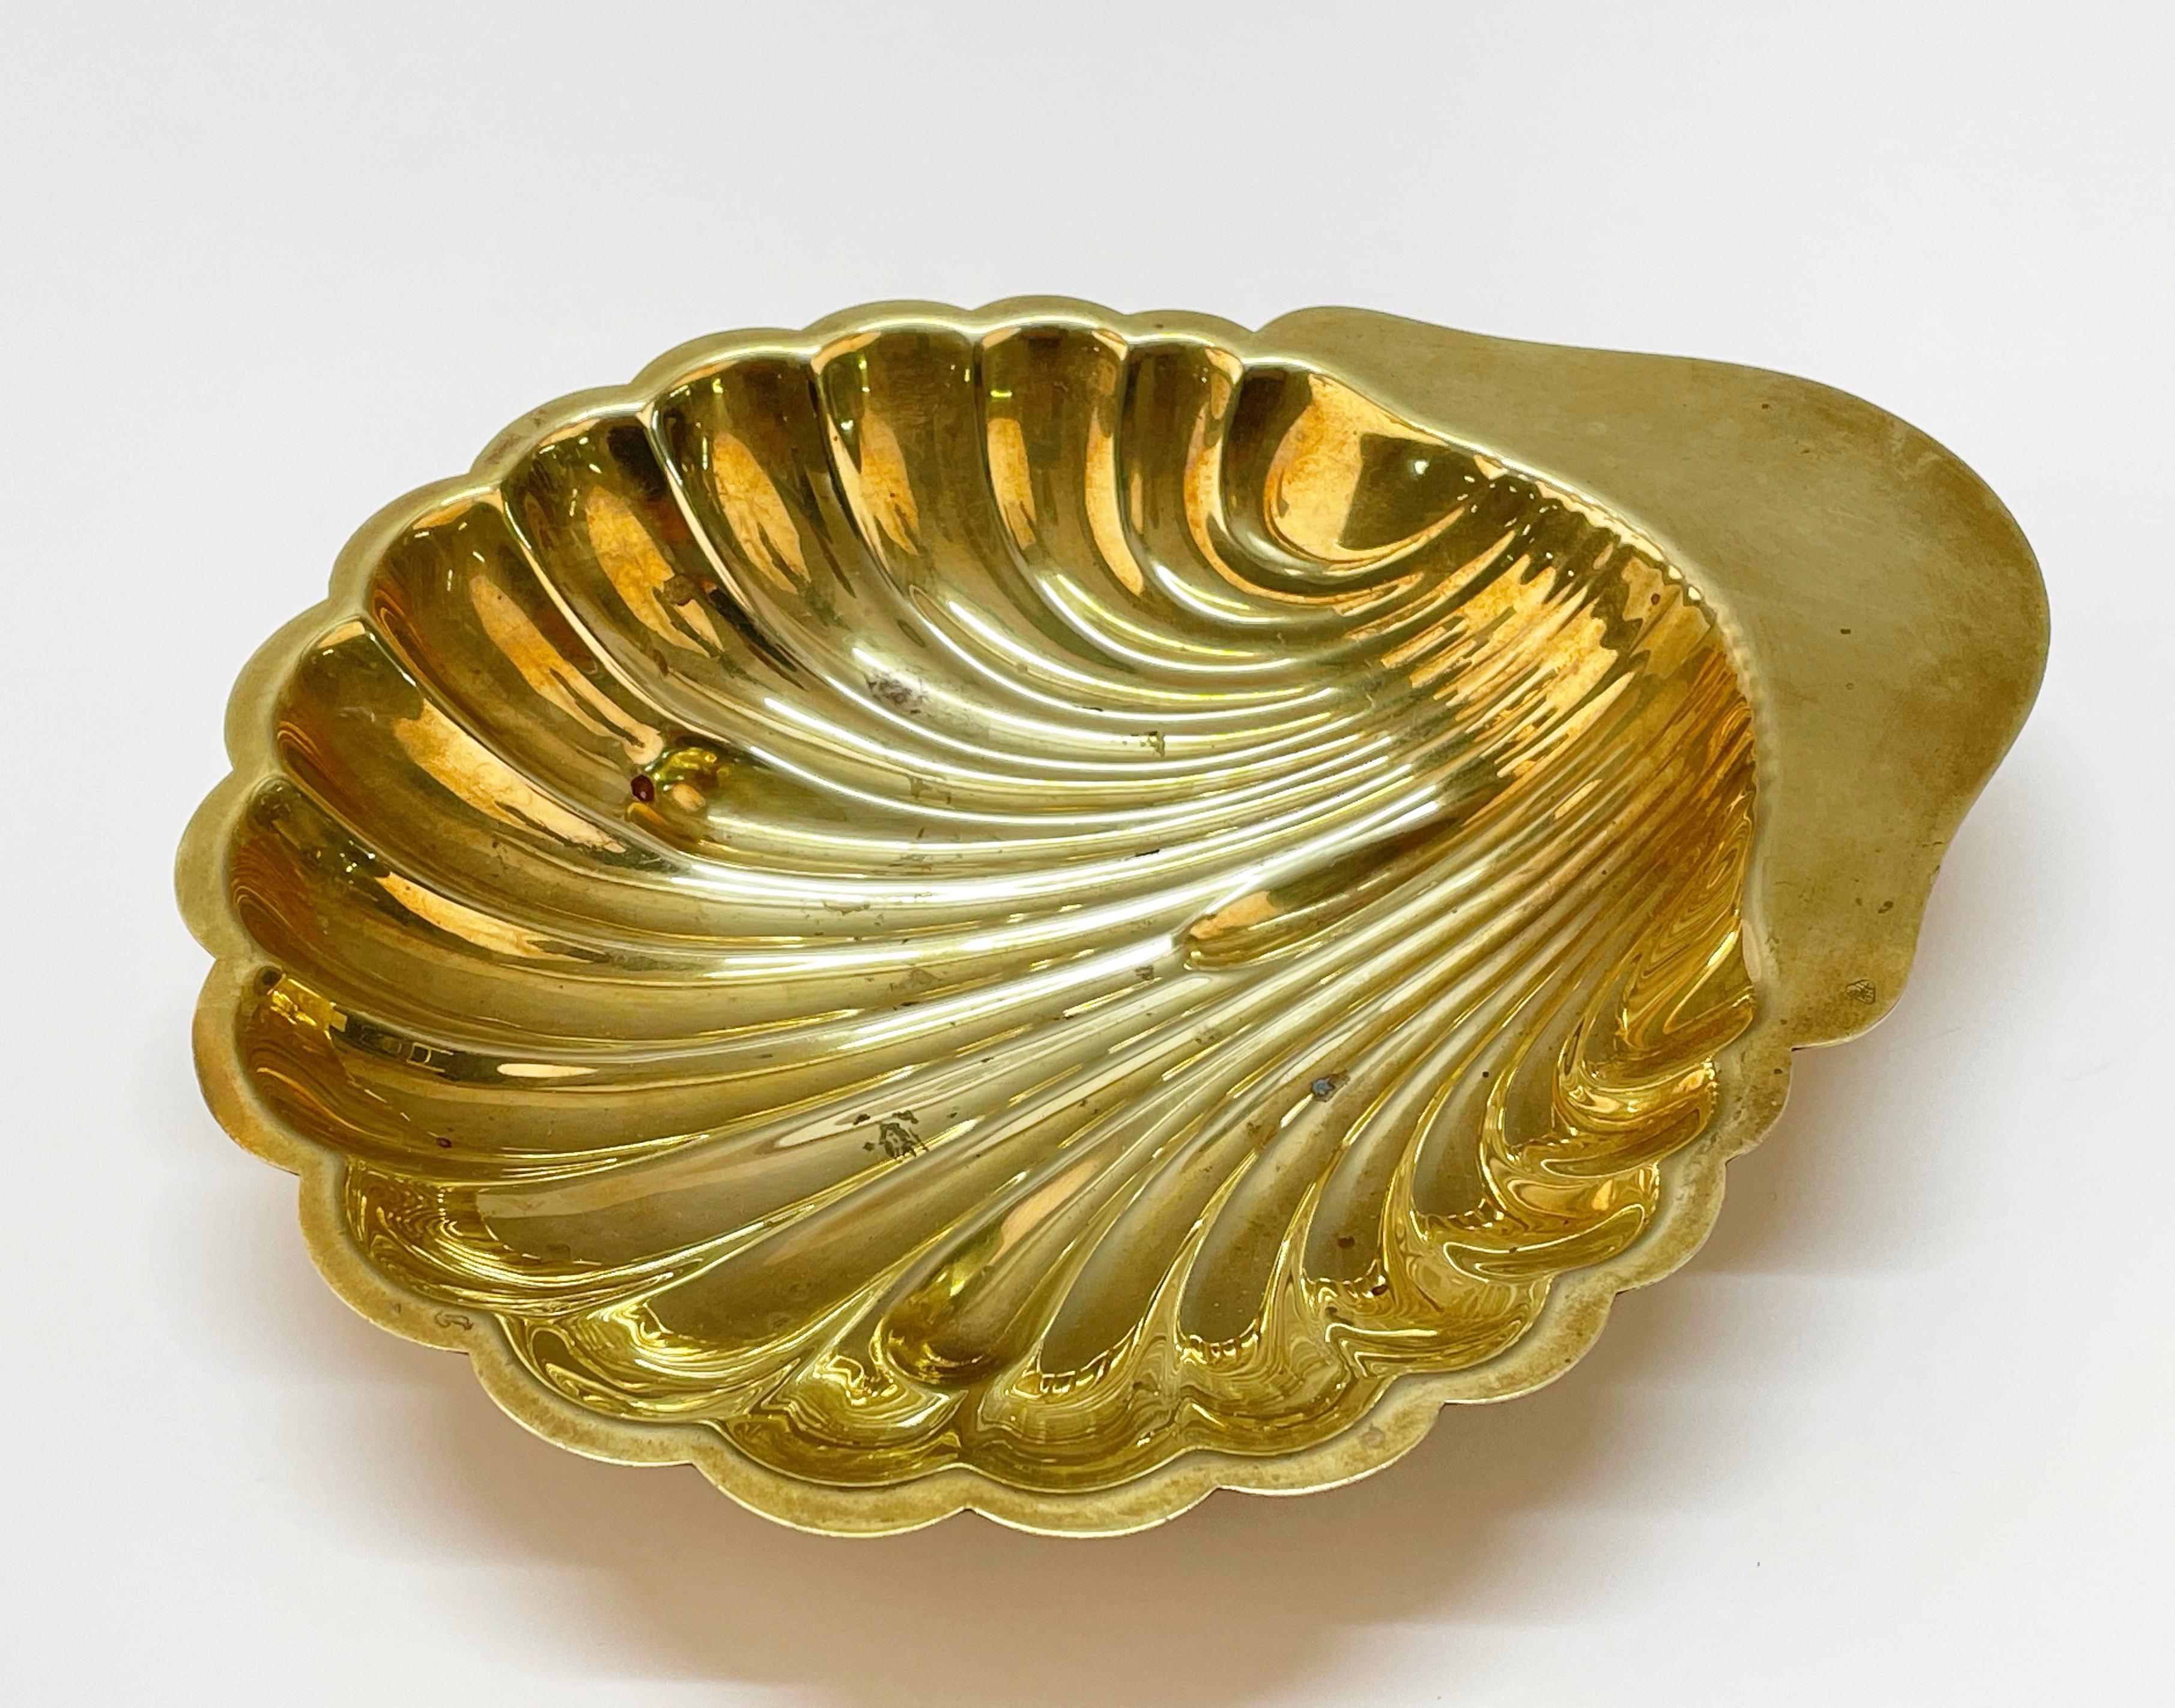 Mid-Century Italian Shell-Shaped Brass Bowl, by Renzo Cassetti 1960s For Sale 3